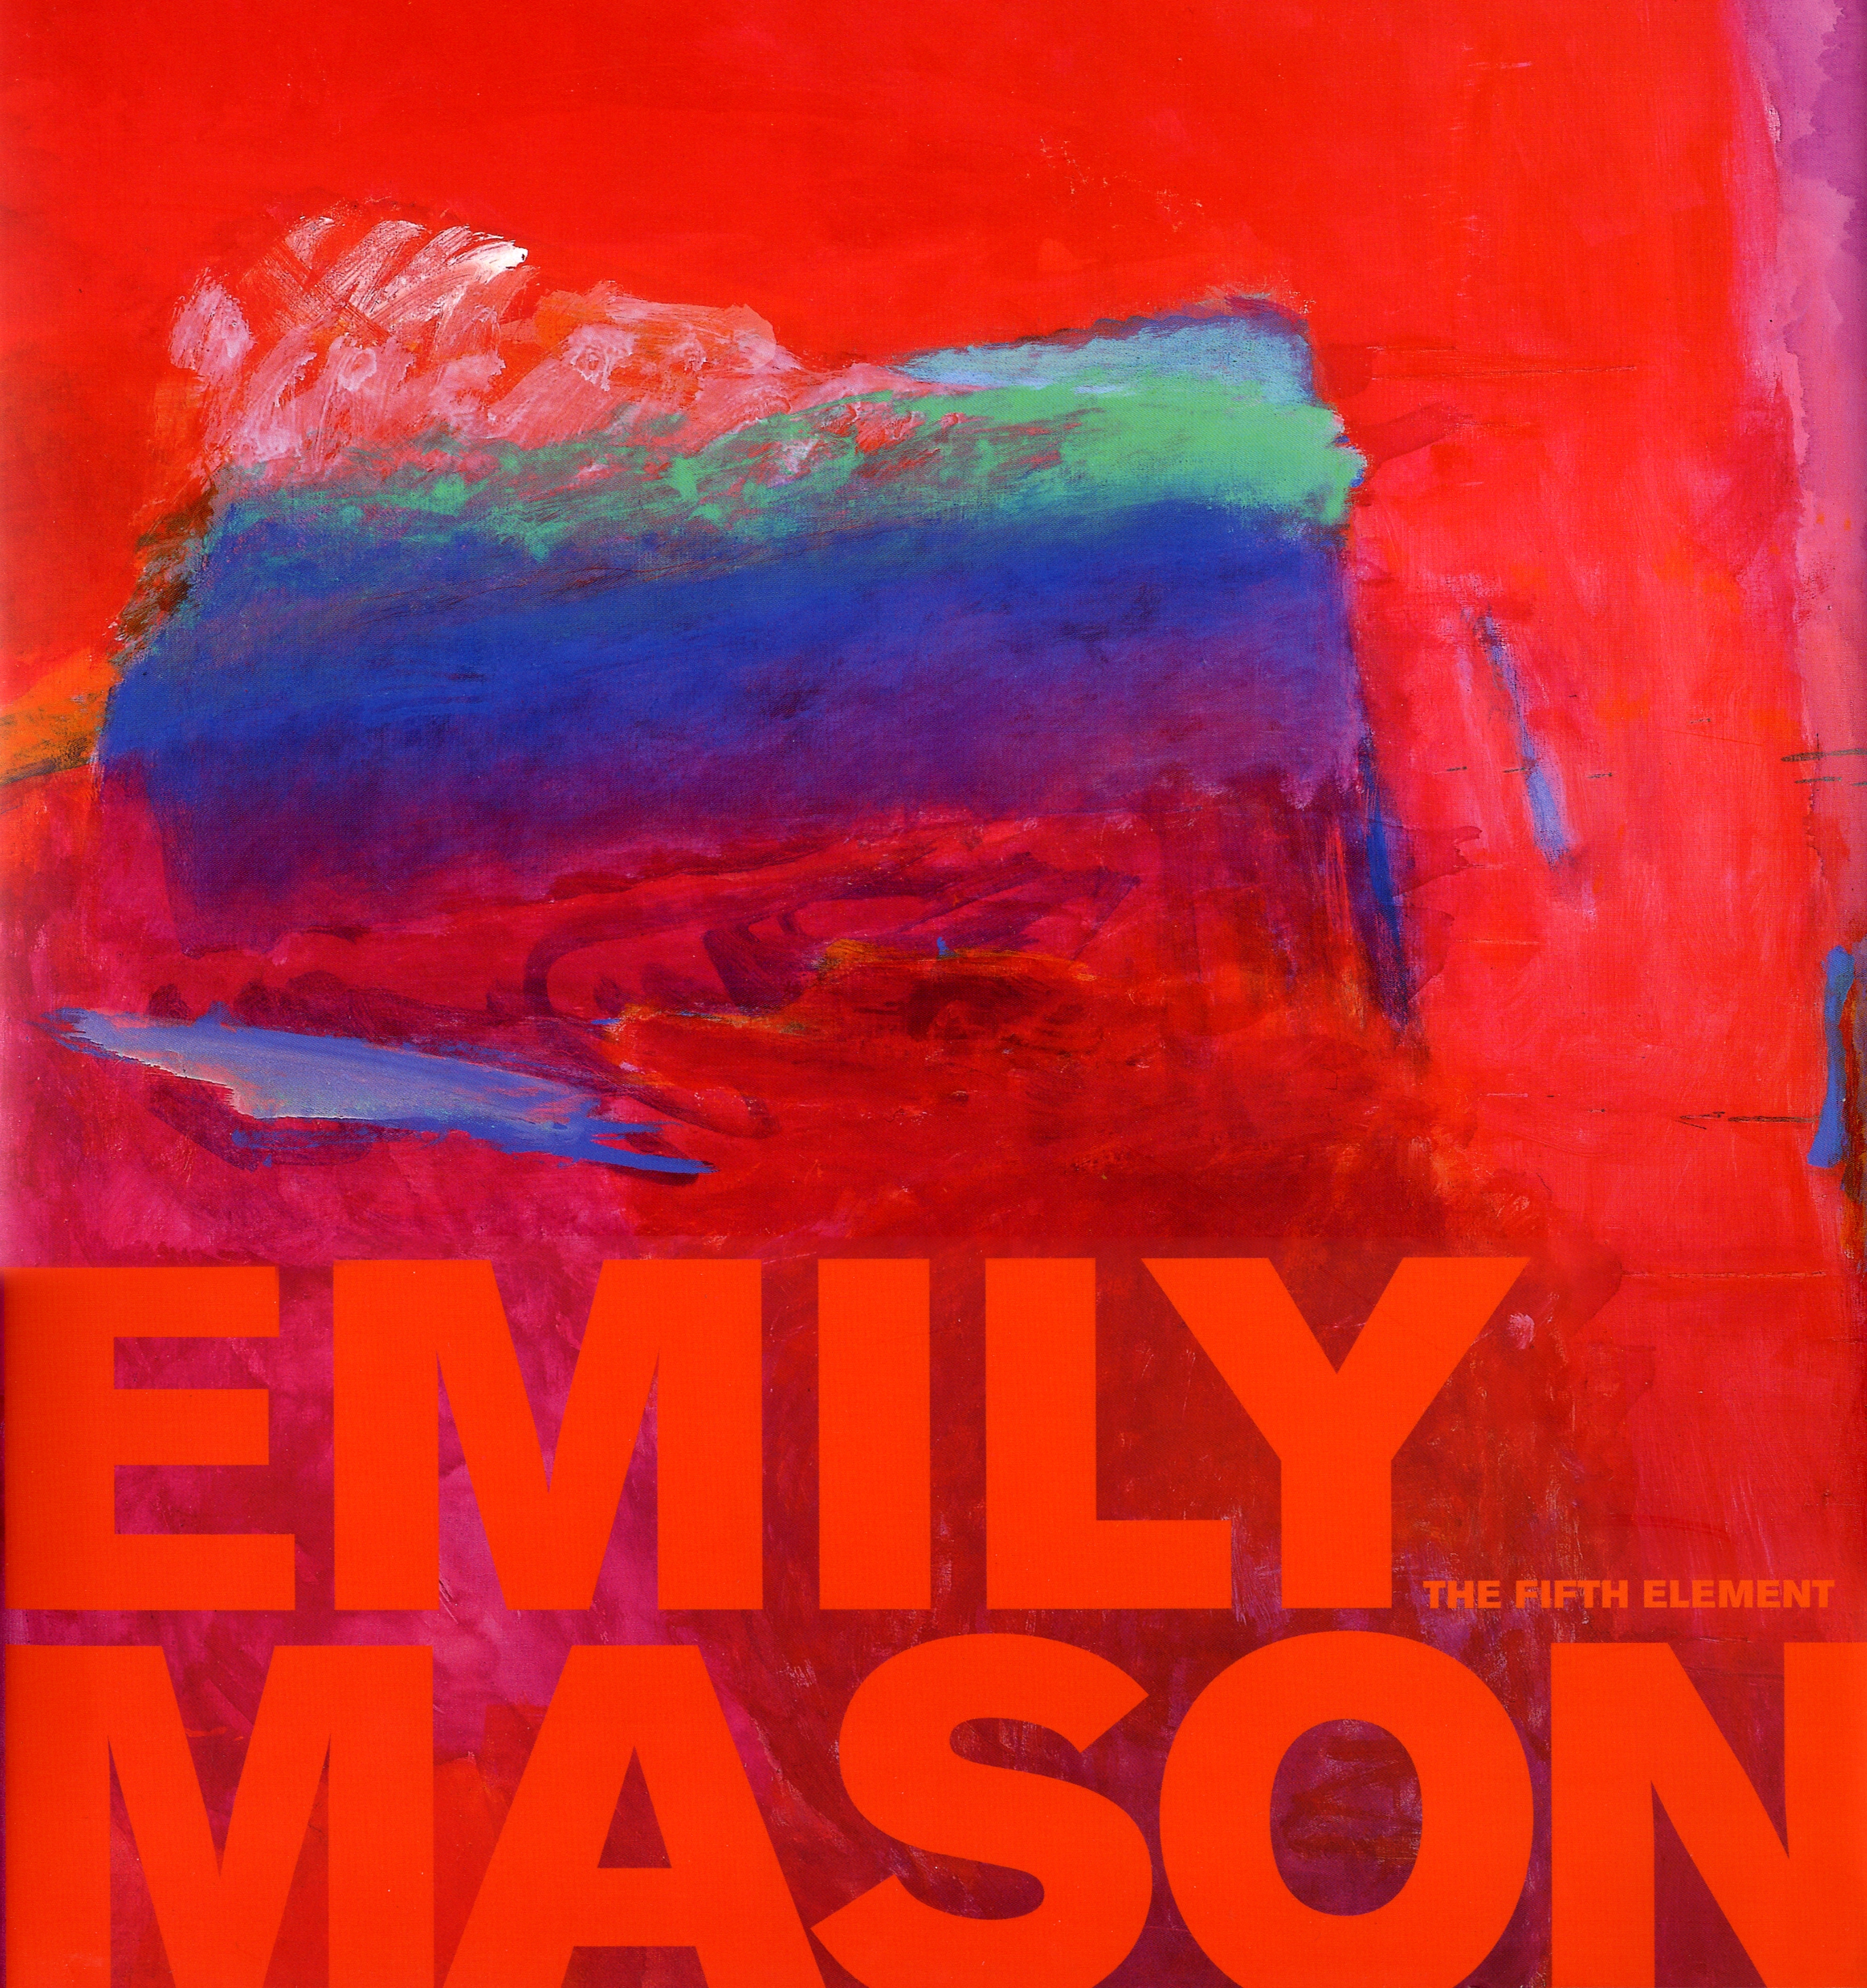 Image of a book cover with a red abstract painting, and the red text "Emily Mason" and "The Fifth Element" at the bottom.